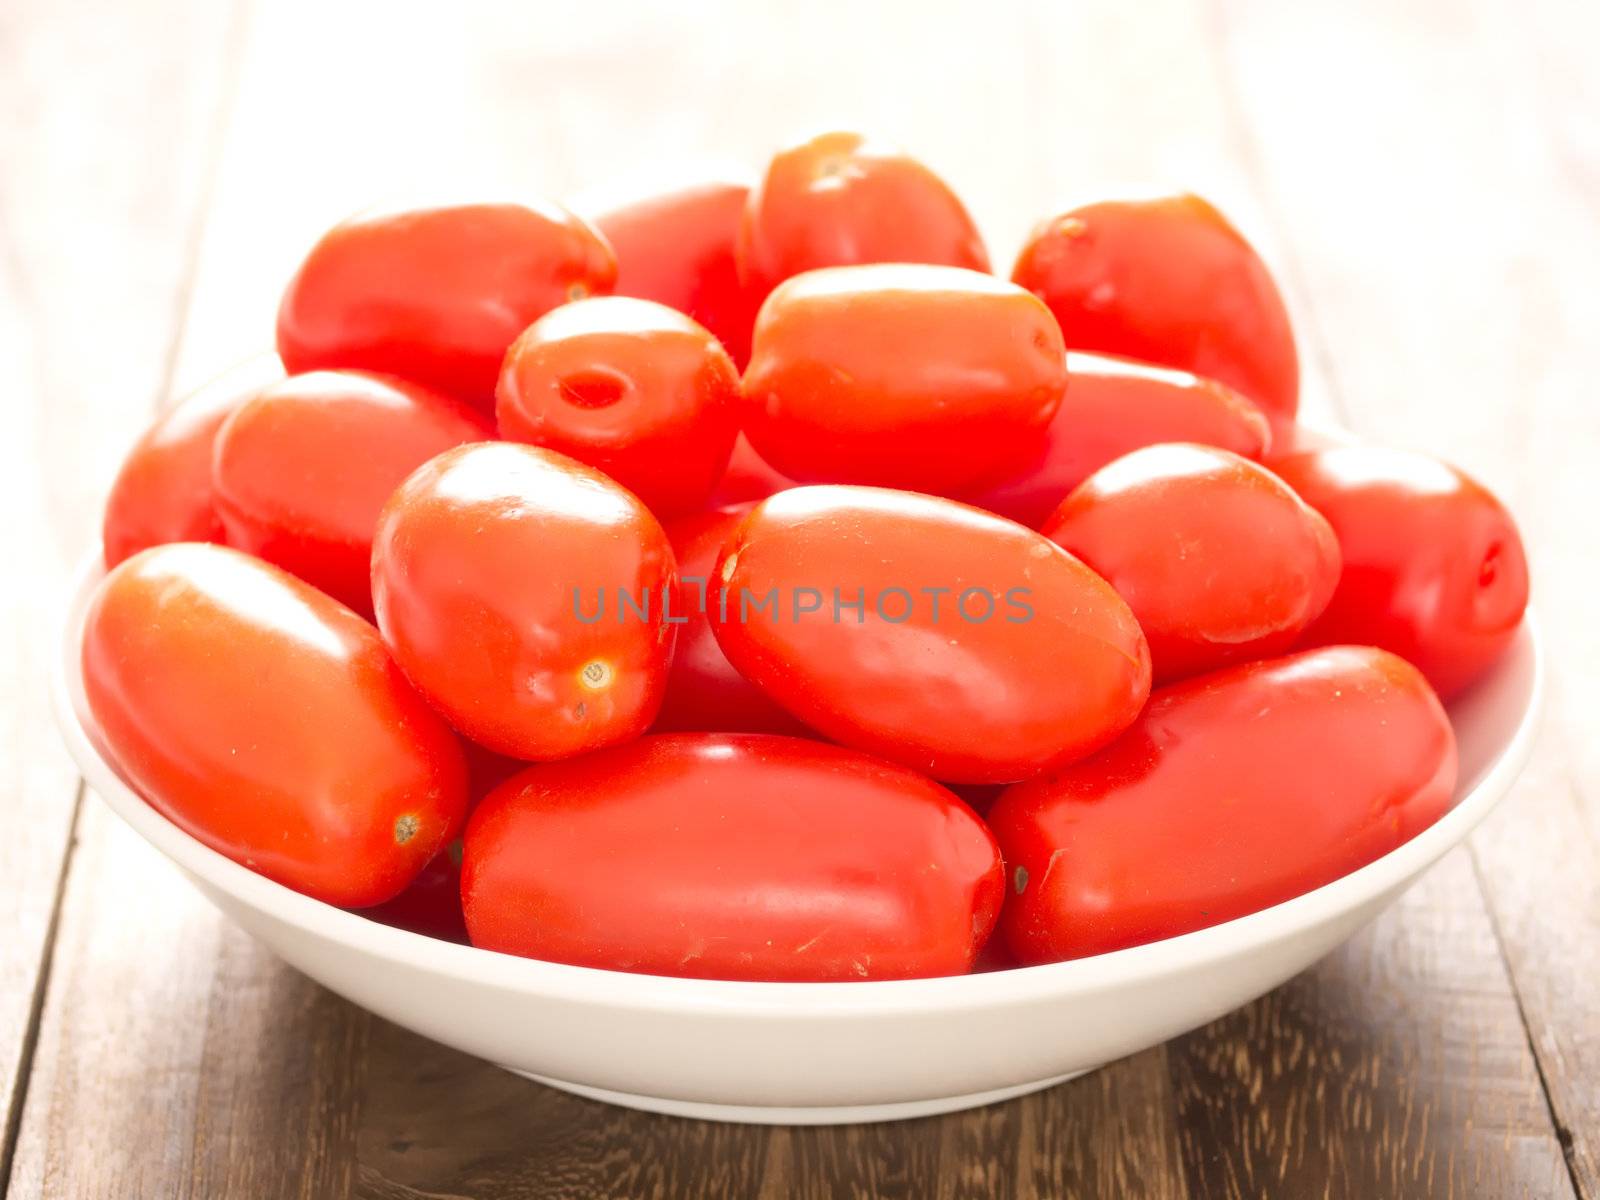 roma tomatoes by zkruger